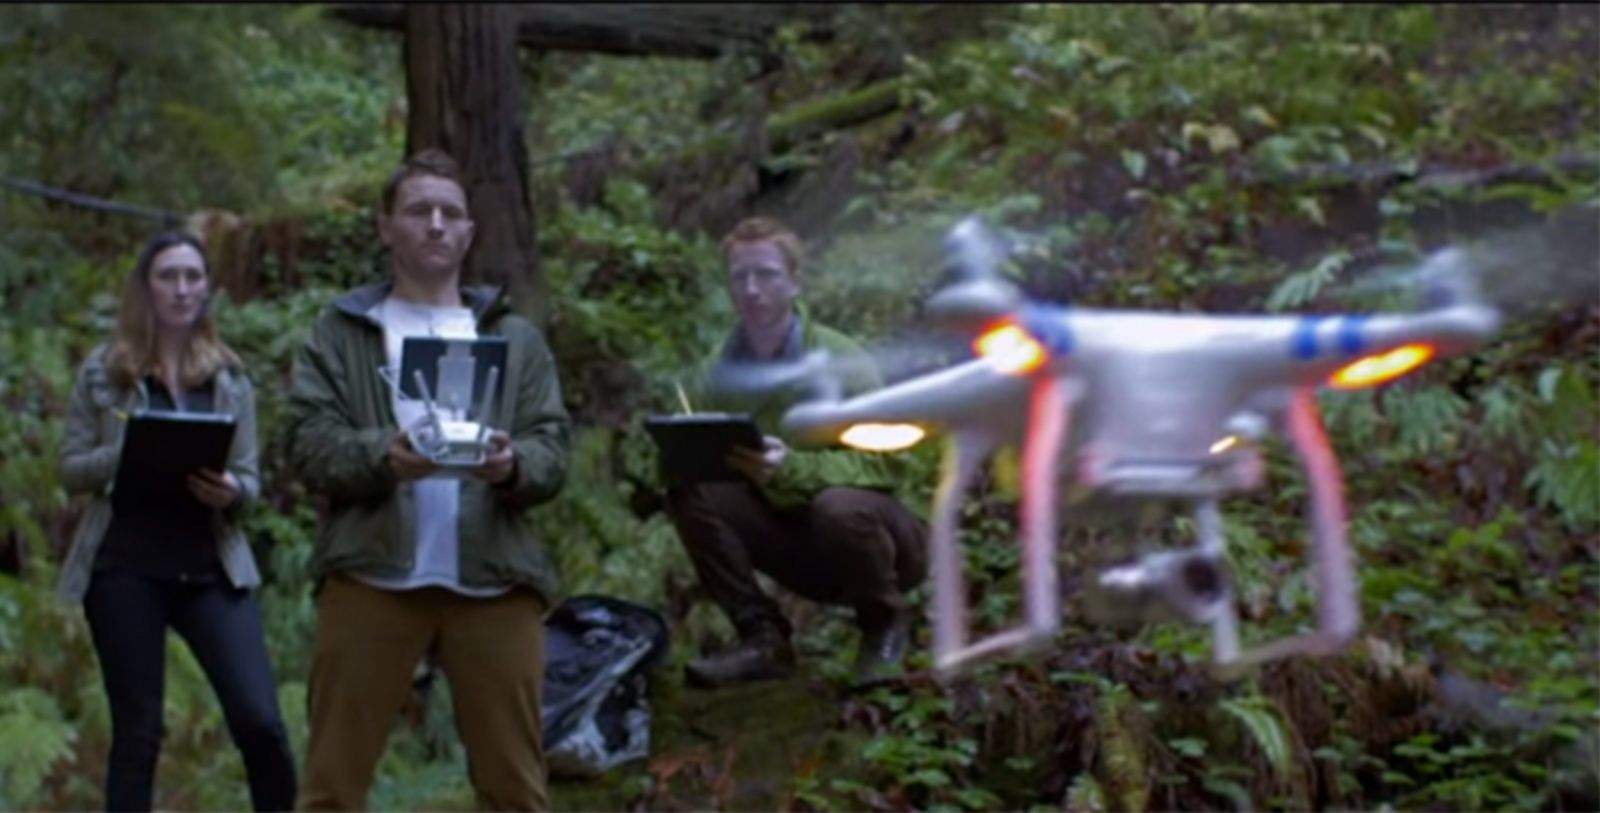 DJI's Phantom 3 is available for pre-order and will soon be sharing airspace with another new drone, the Solo by 3D Robotics. Photo: DJI/YouTube